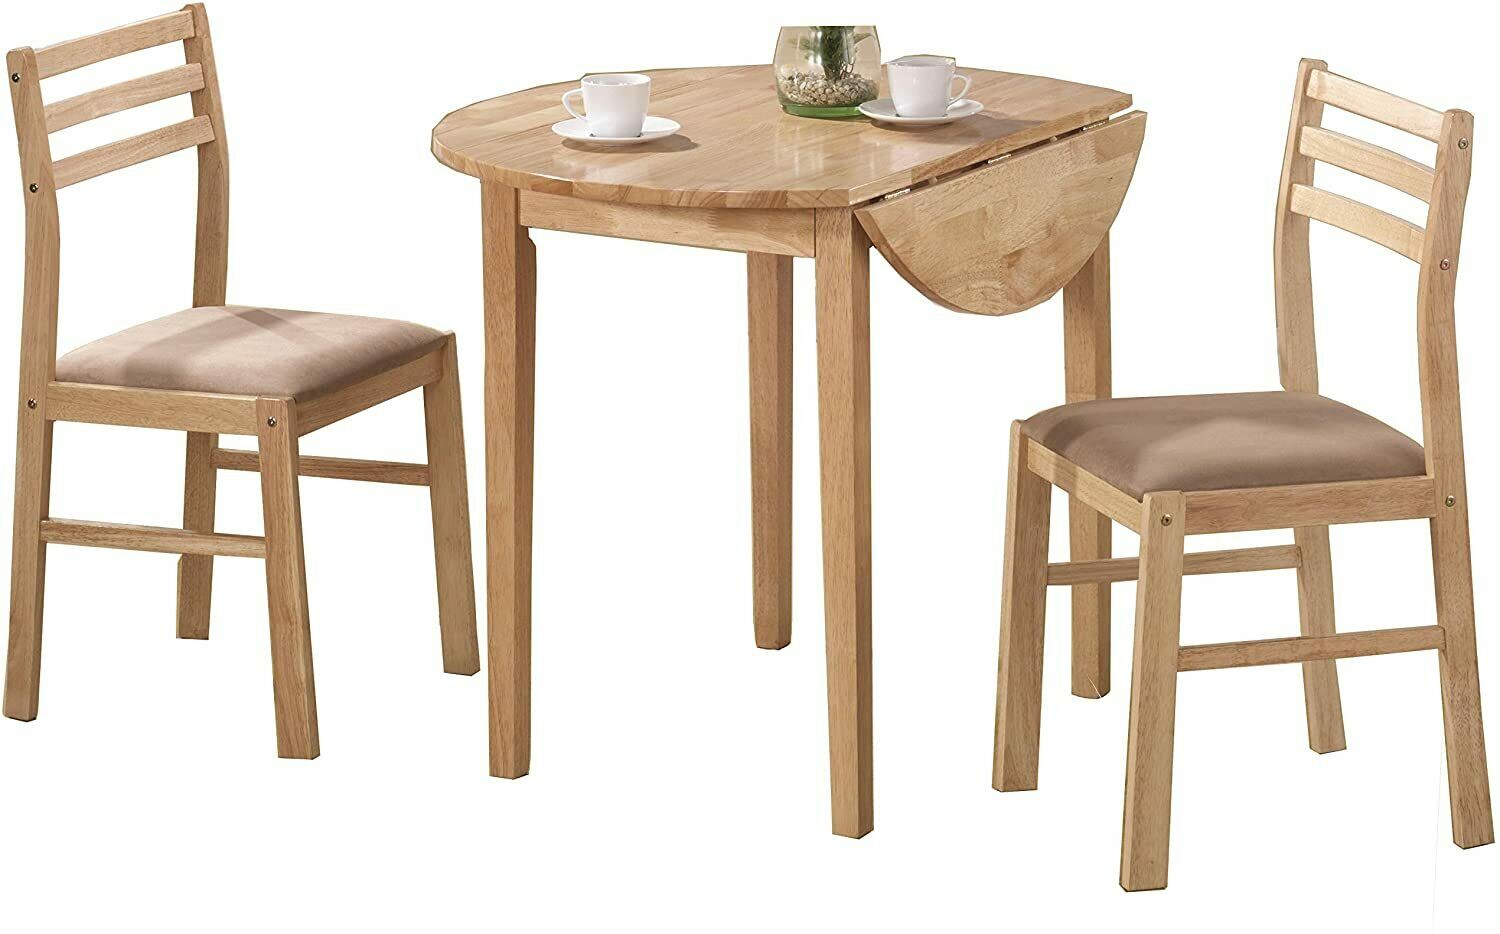 Bucknell 3-piece Dining Set with Drop Leaf Natural and Tan